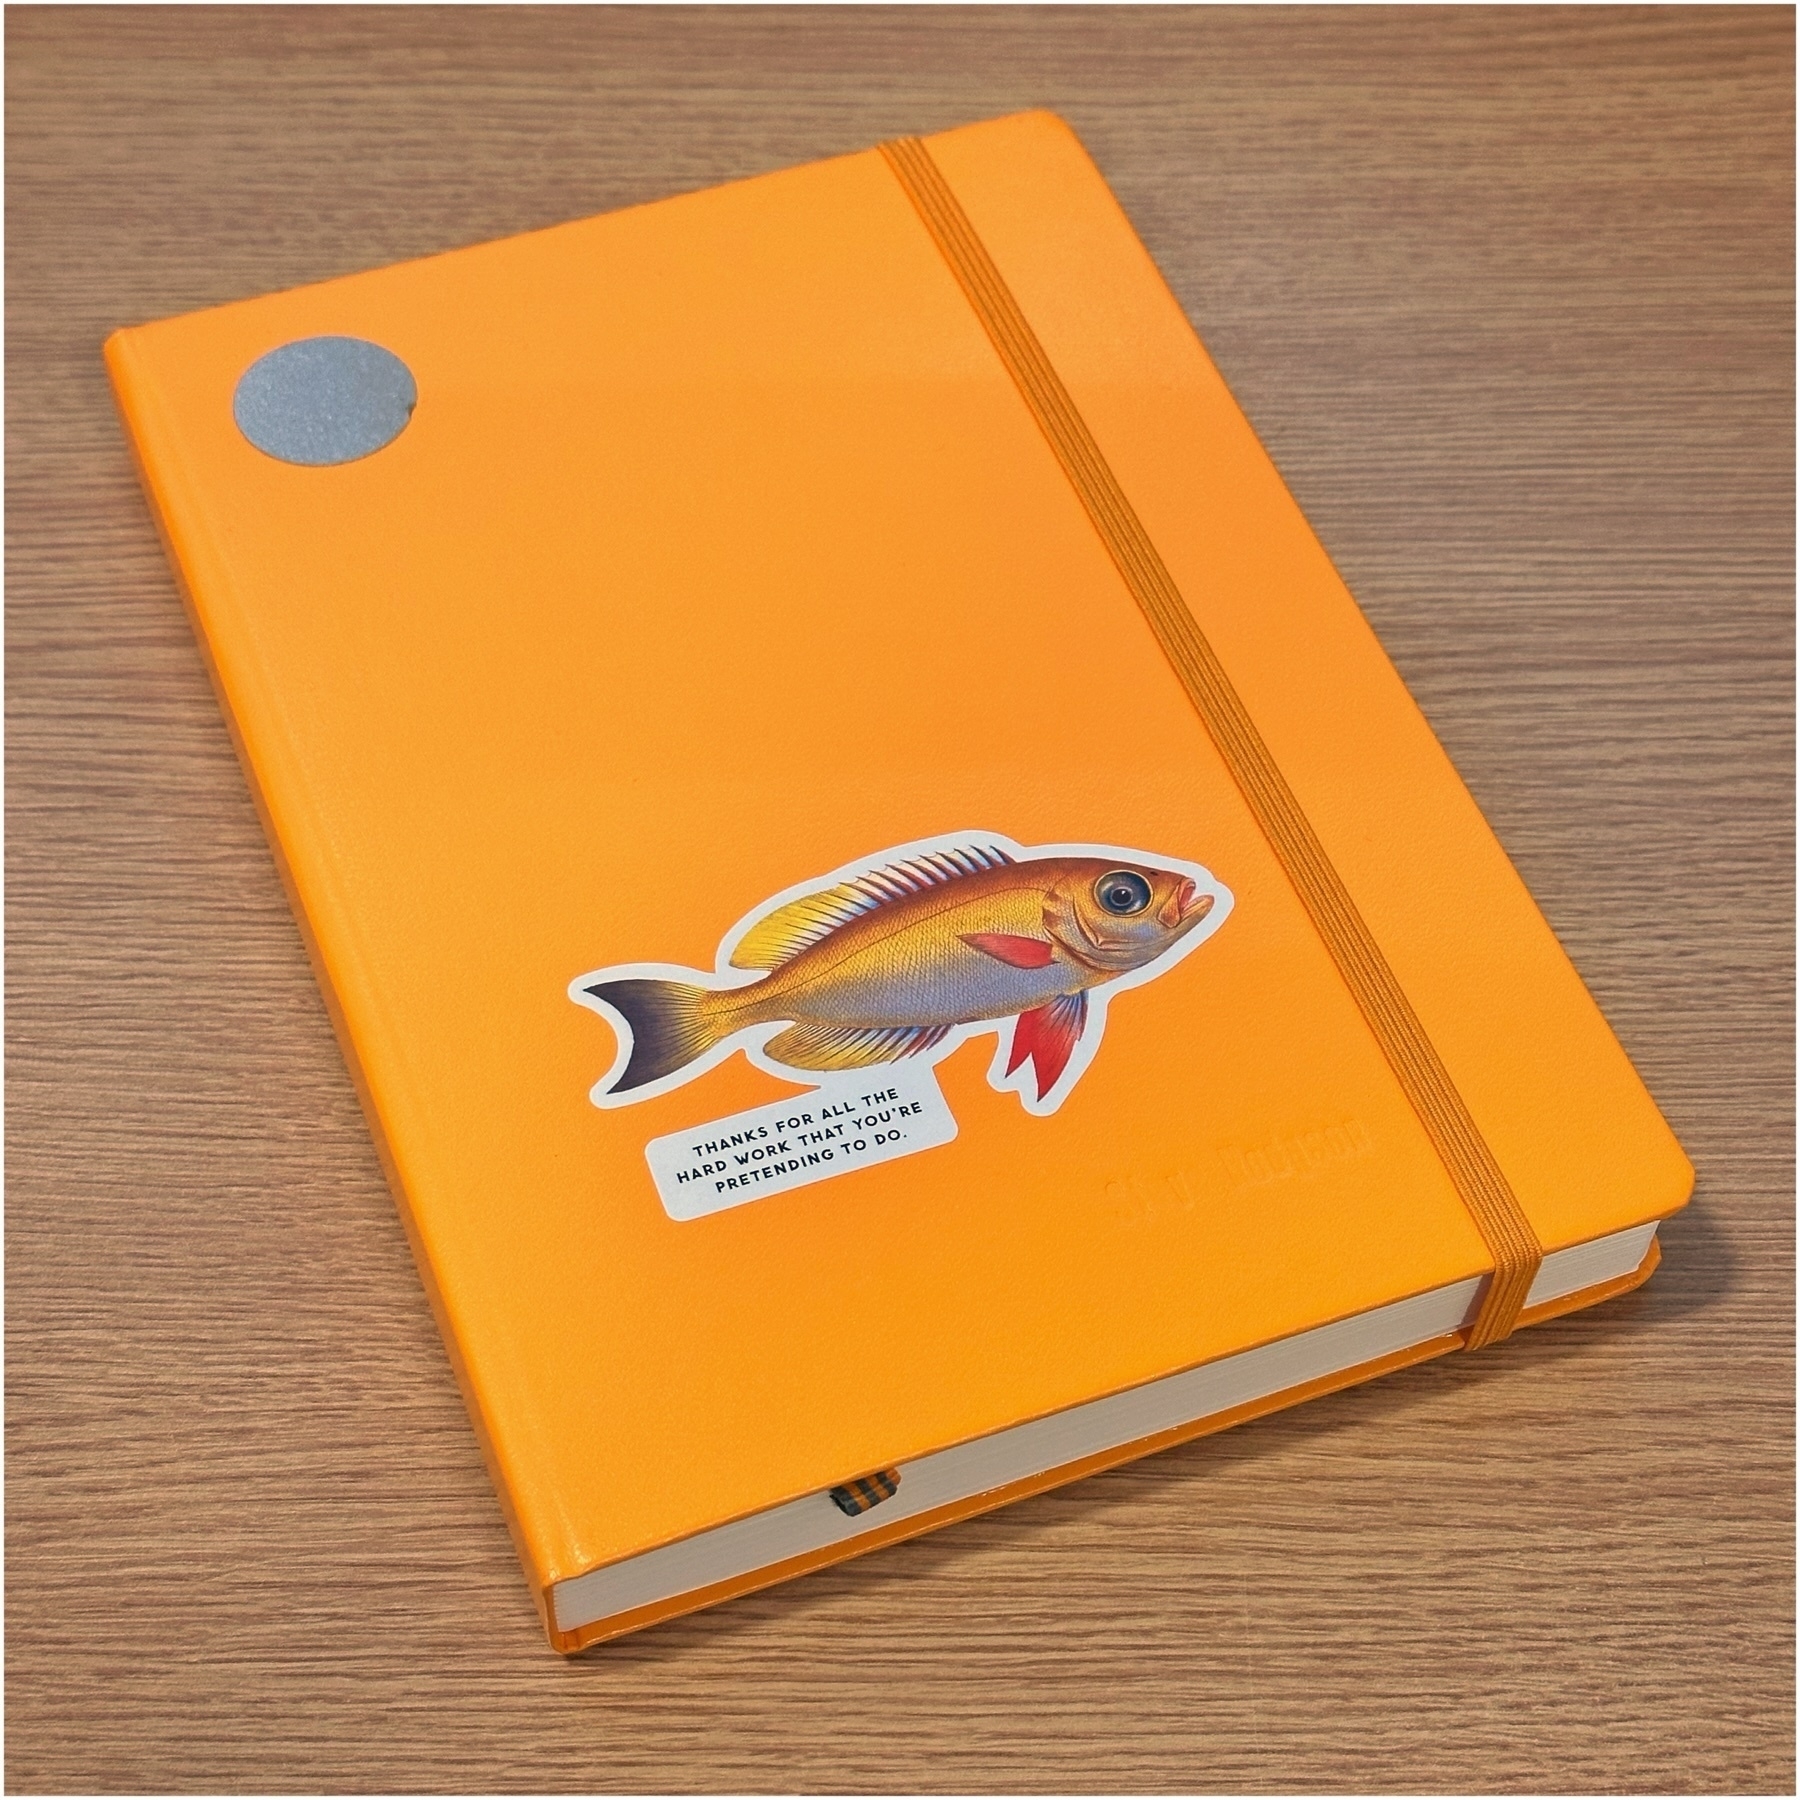 Orange notebook with an elastic closure and a fish illustration, featuring a humorous caption: "Thanks for all the hard work you're pretending to do."